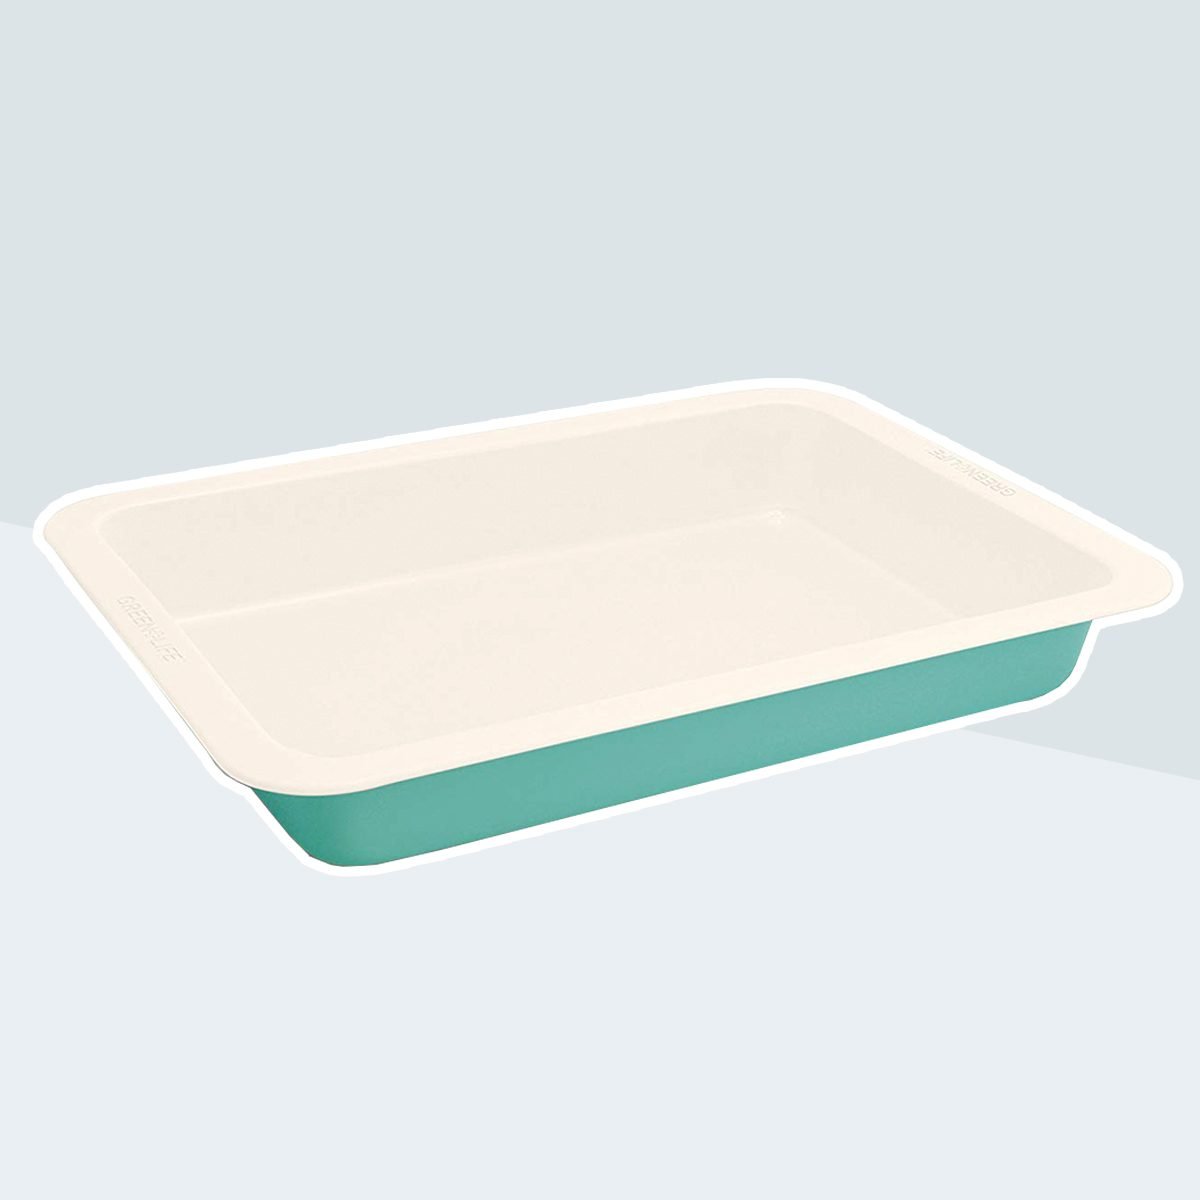 https://www.tasteofhome.com/wp-content/uploads/2019/03/GreenLife-922x1322-Ceramic-Non-Stick-Cake-Pan-Turquoise-.jpg?fit=700%2C700